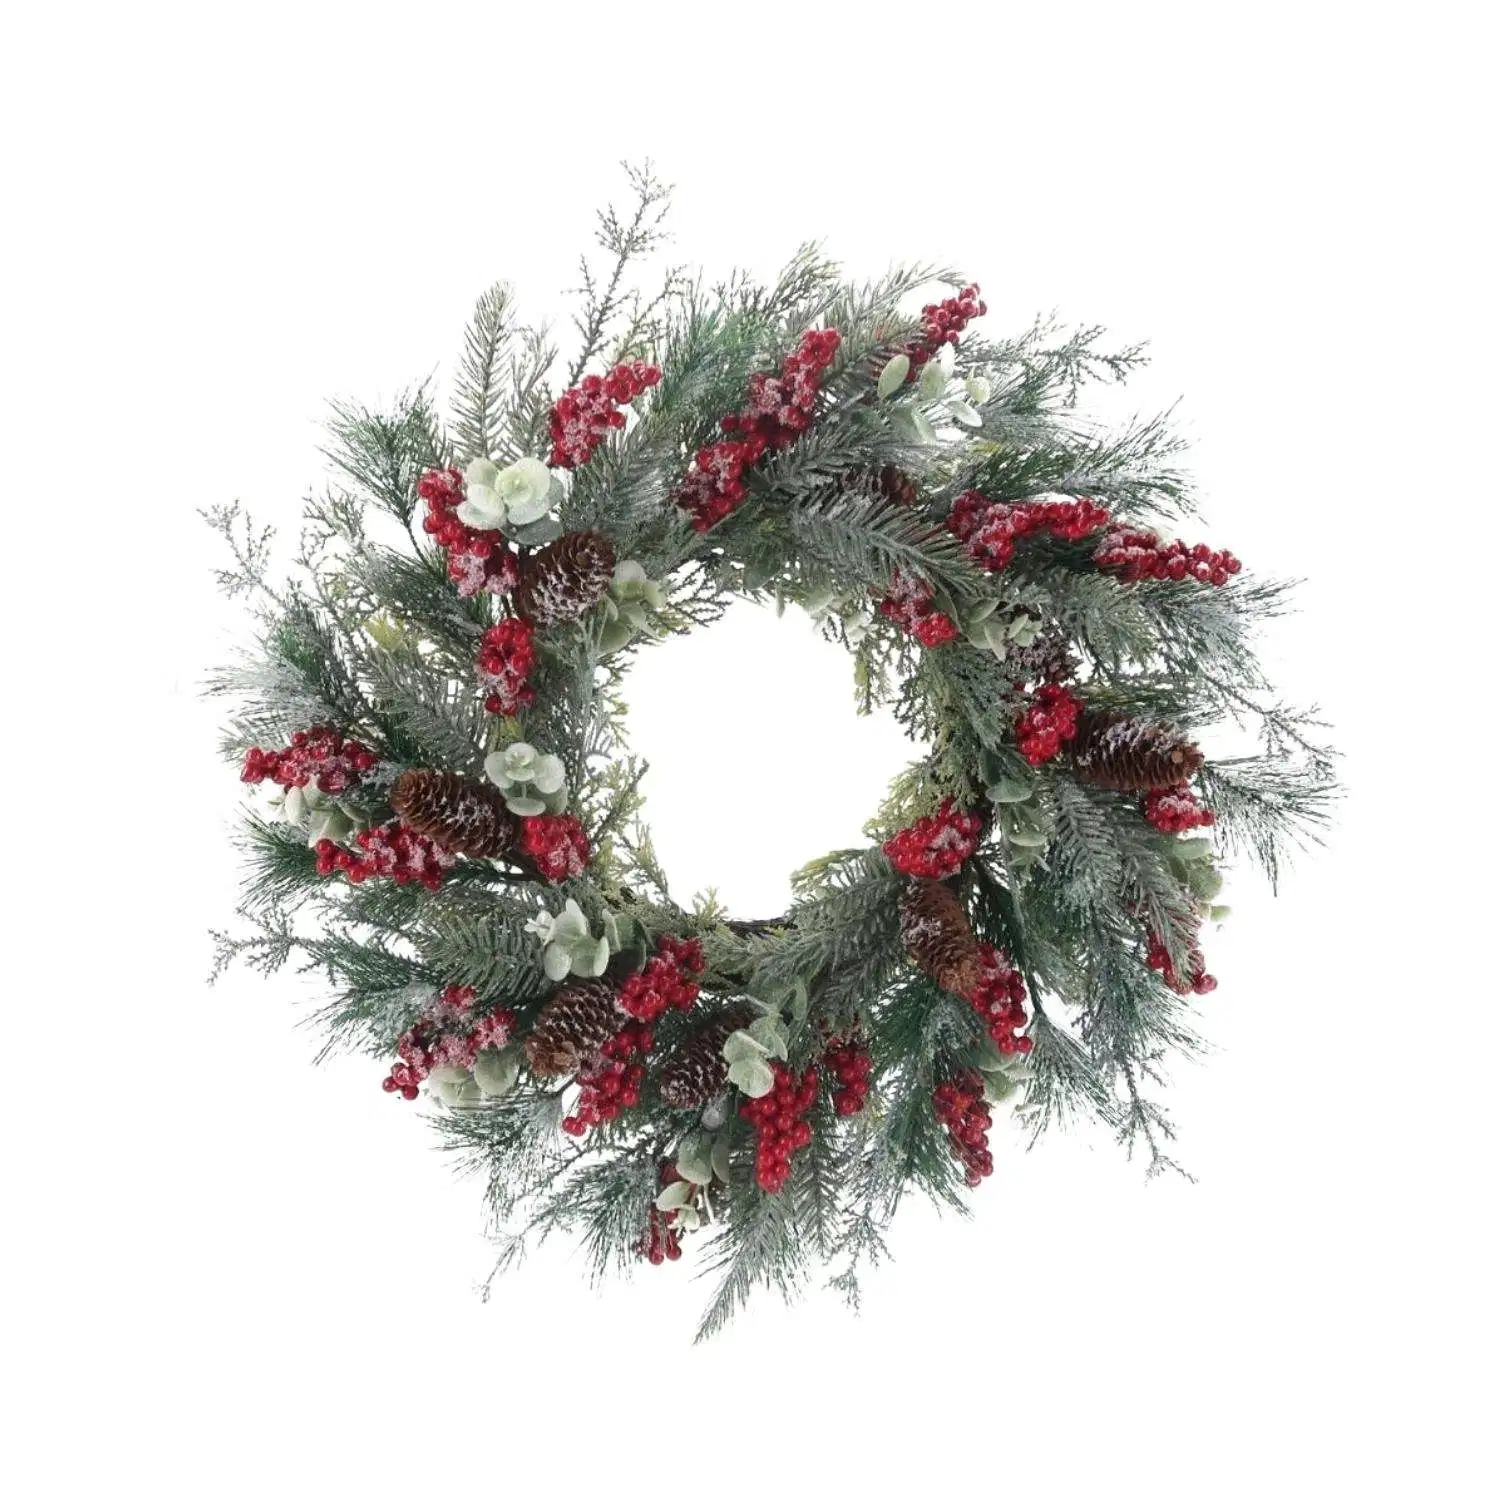 Home Decorations Party Holiday Supplies Frosted Pine Needles Pine Leaf with Pinecones and Berries Greenery Christmas Garland